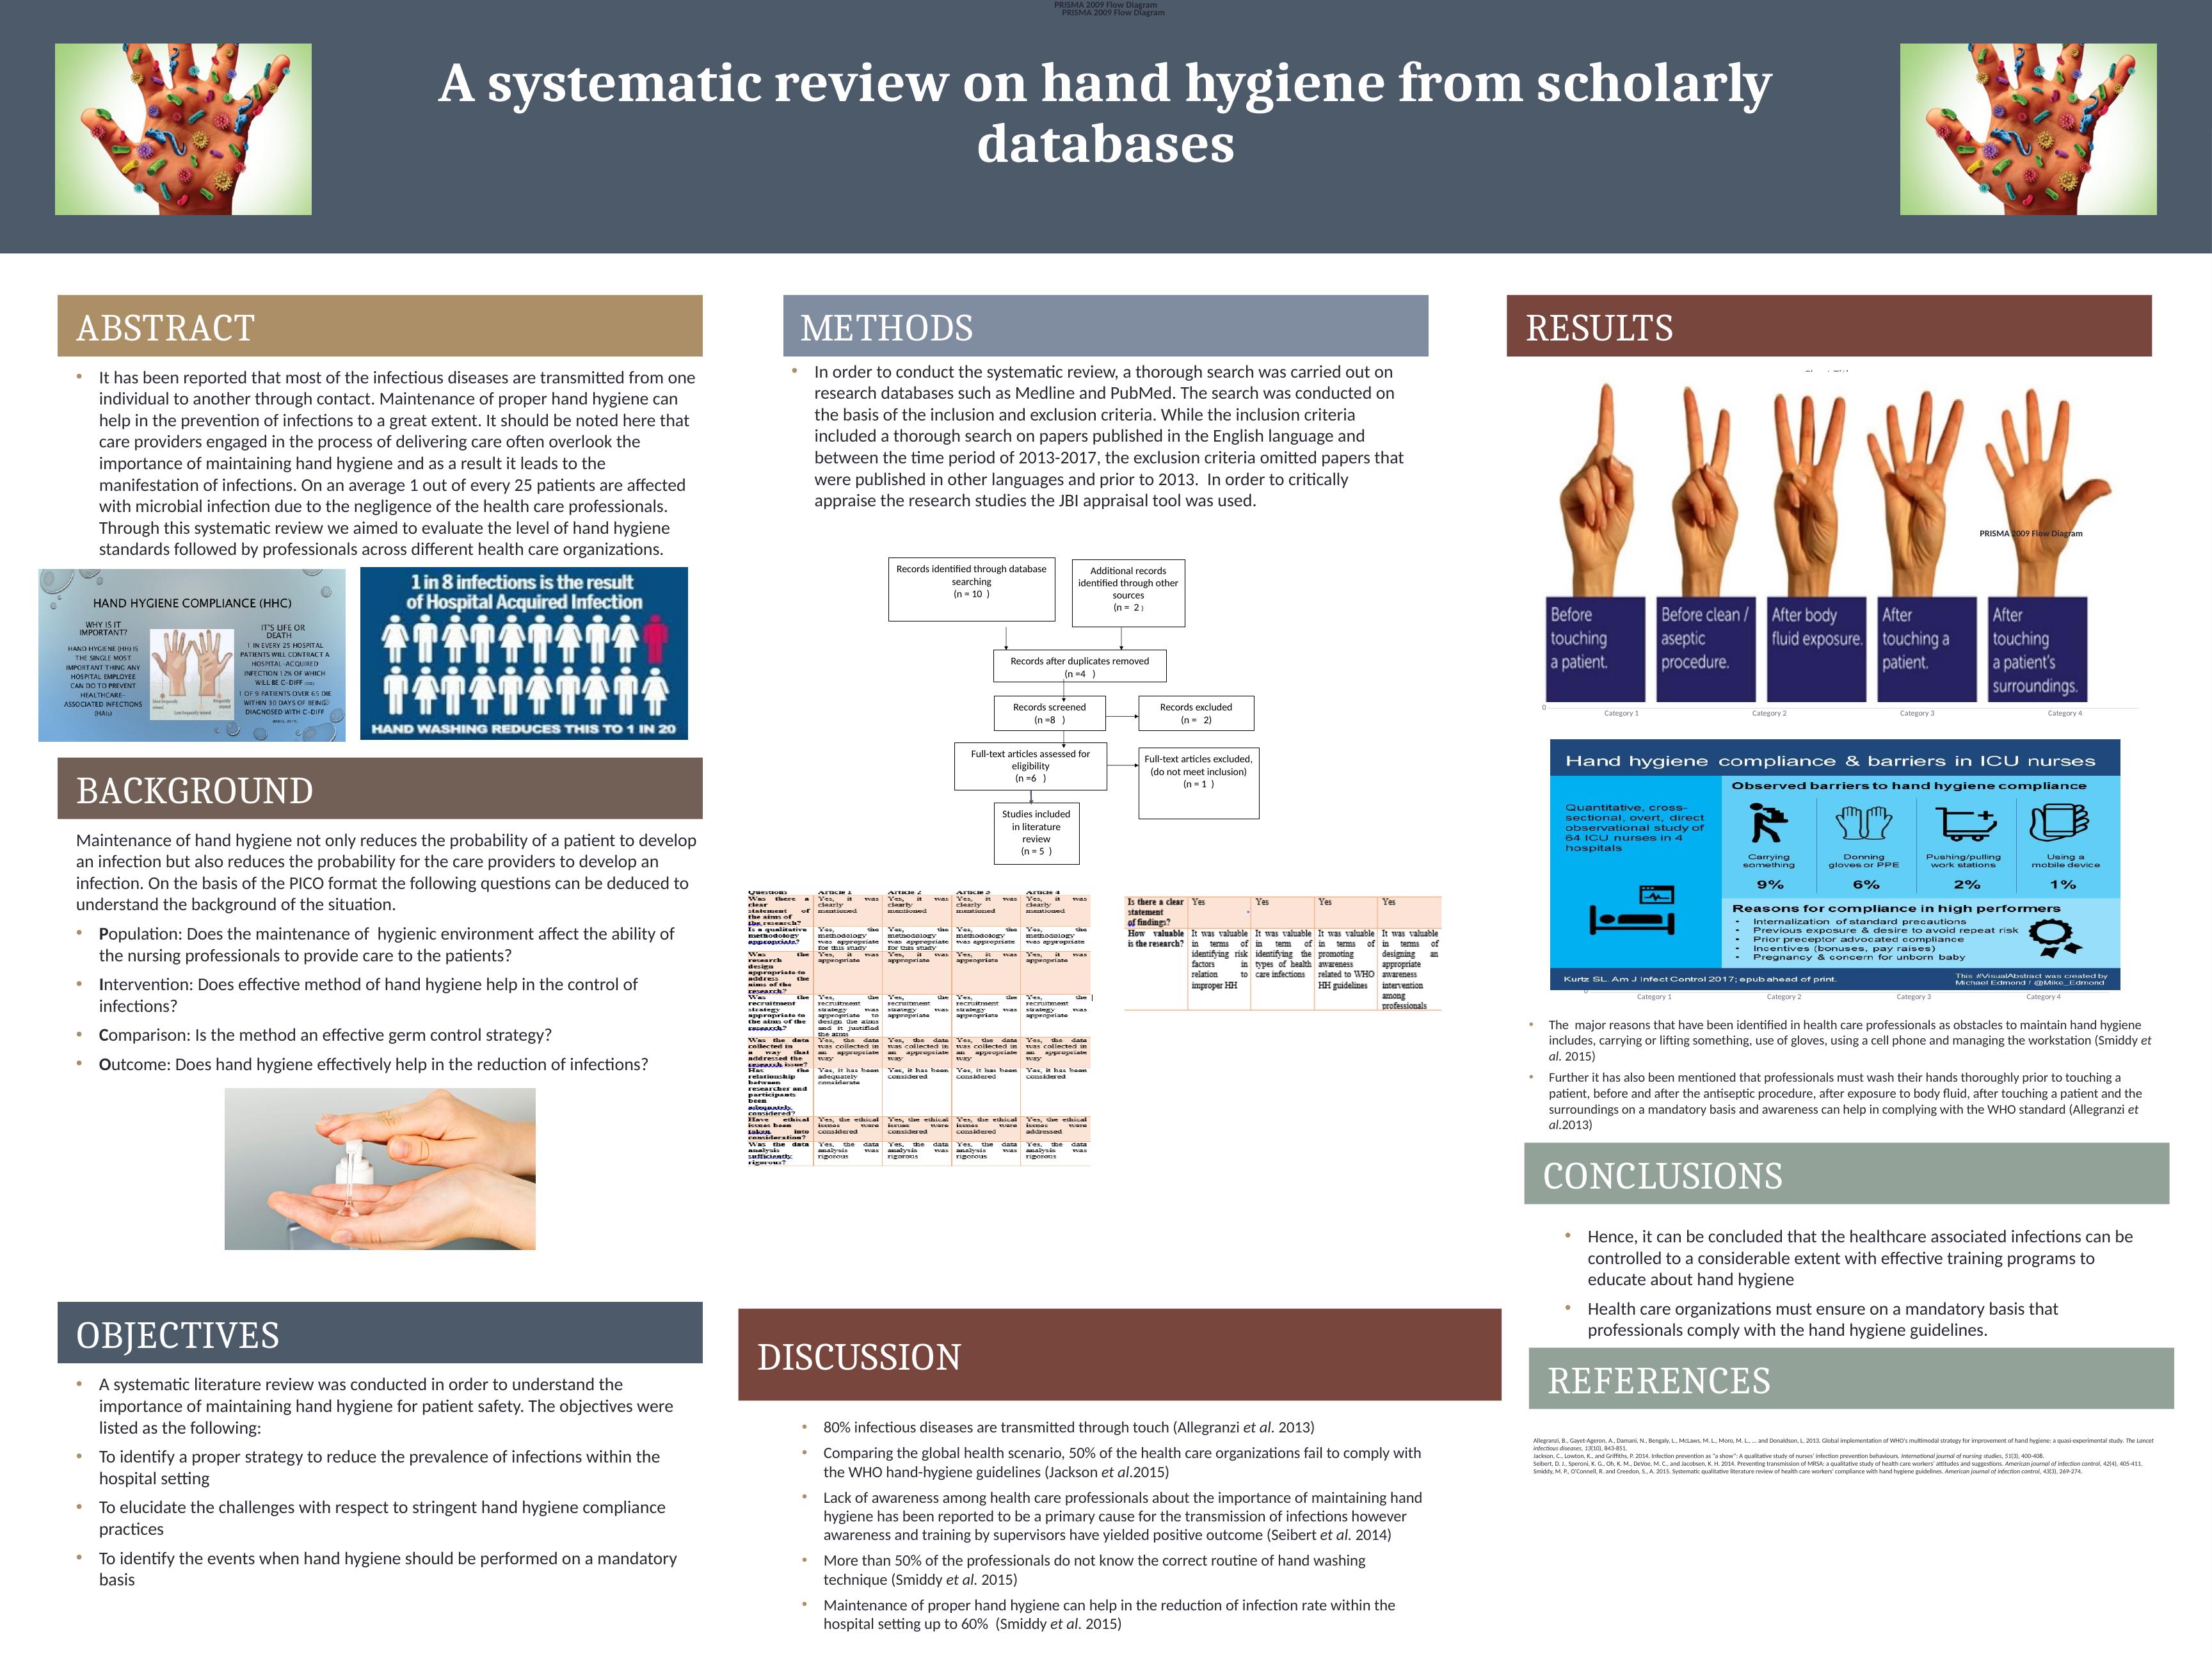 Systematic Review on Hand Hygiene: Importance and Compliance_1